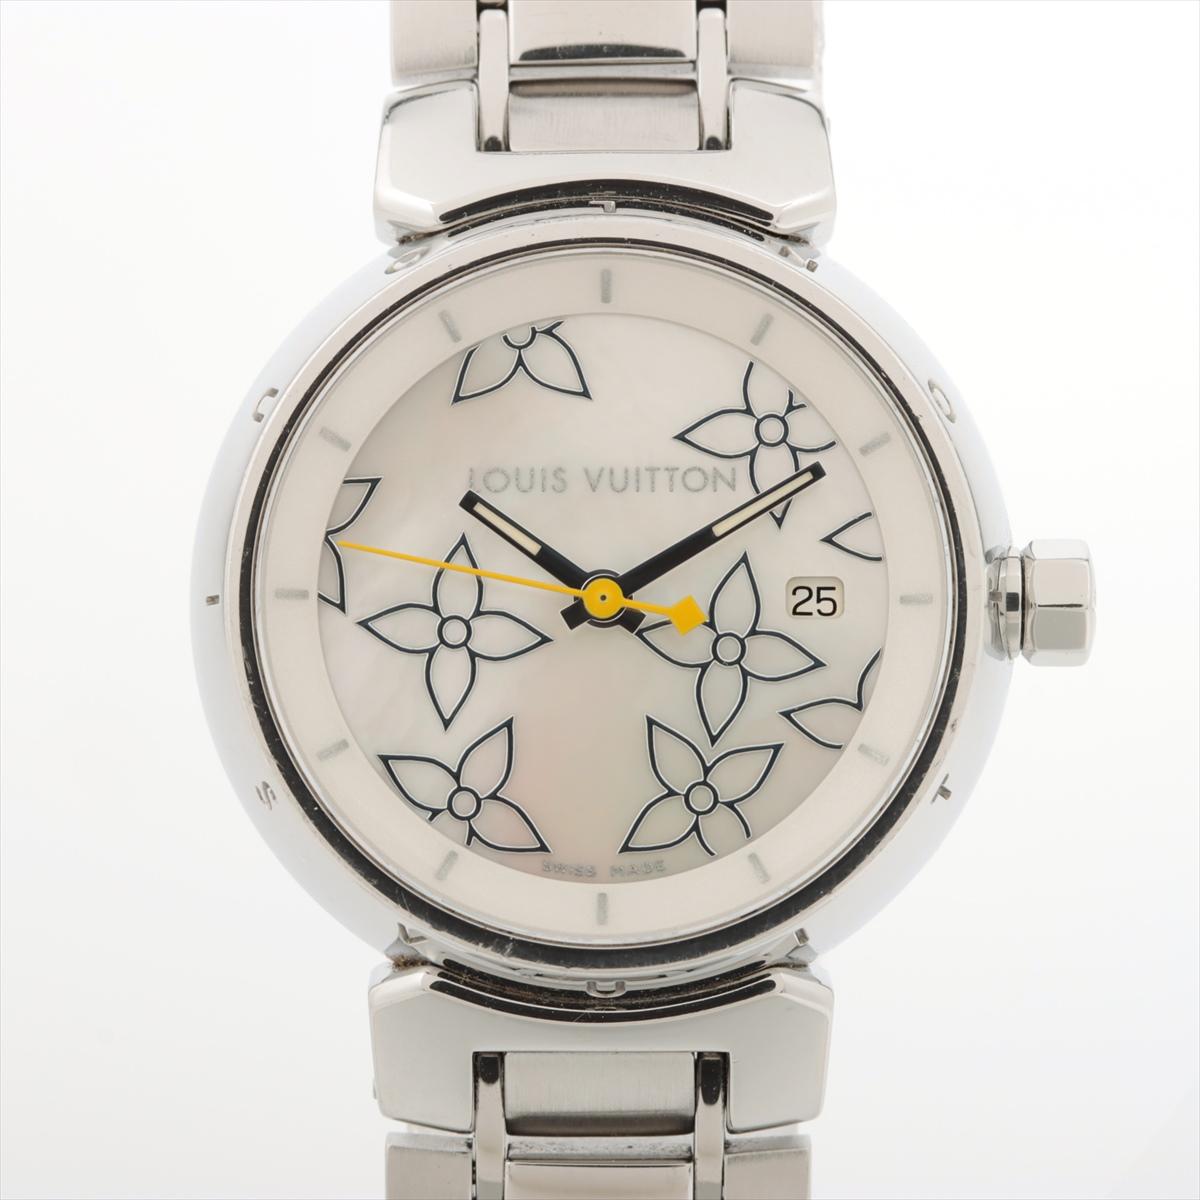 RETAIL: $2,670

The Louis Vuitton Tambour Stainless Steel Watch is an embodiment of timeless elegance and sophistication, marrying exquisite craftsmanship with precision timekeeping. The remarkable timepiece boasts a durable stainless steel case,